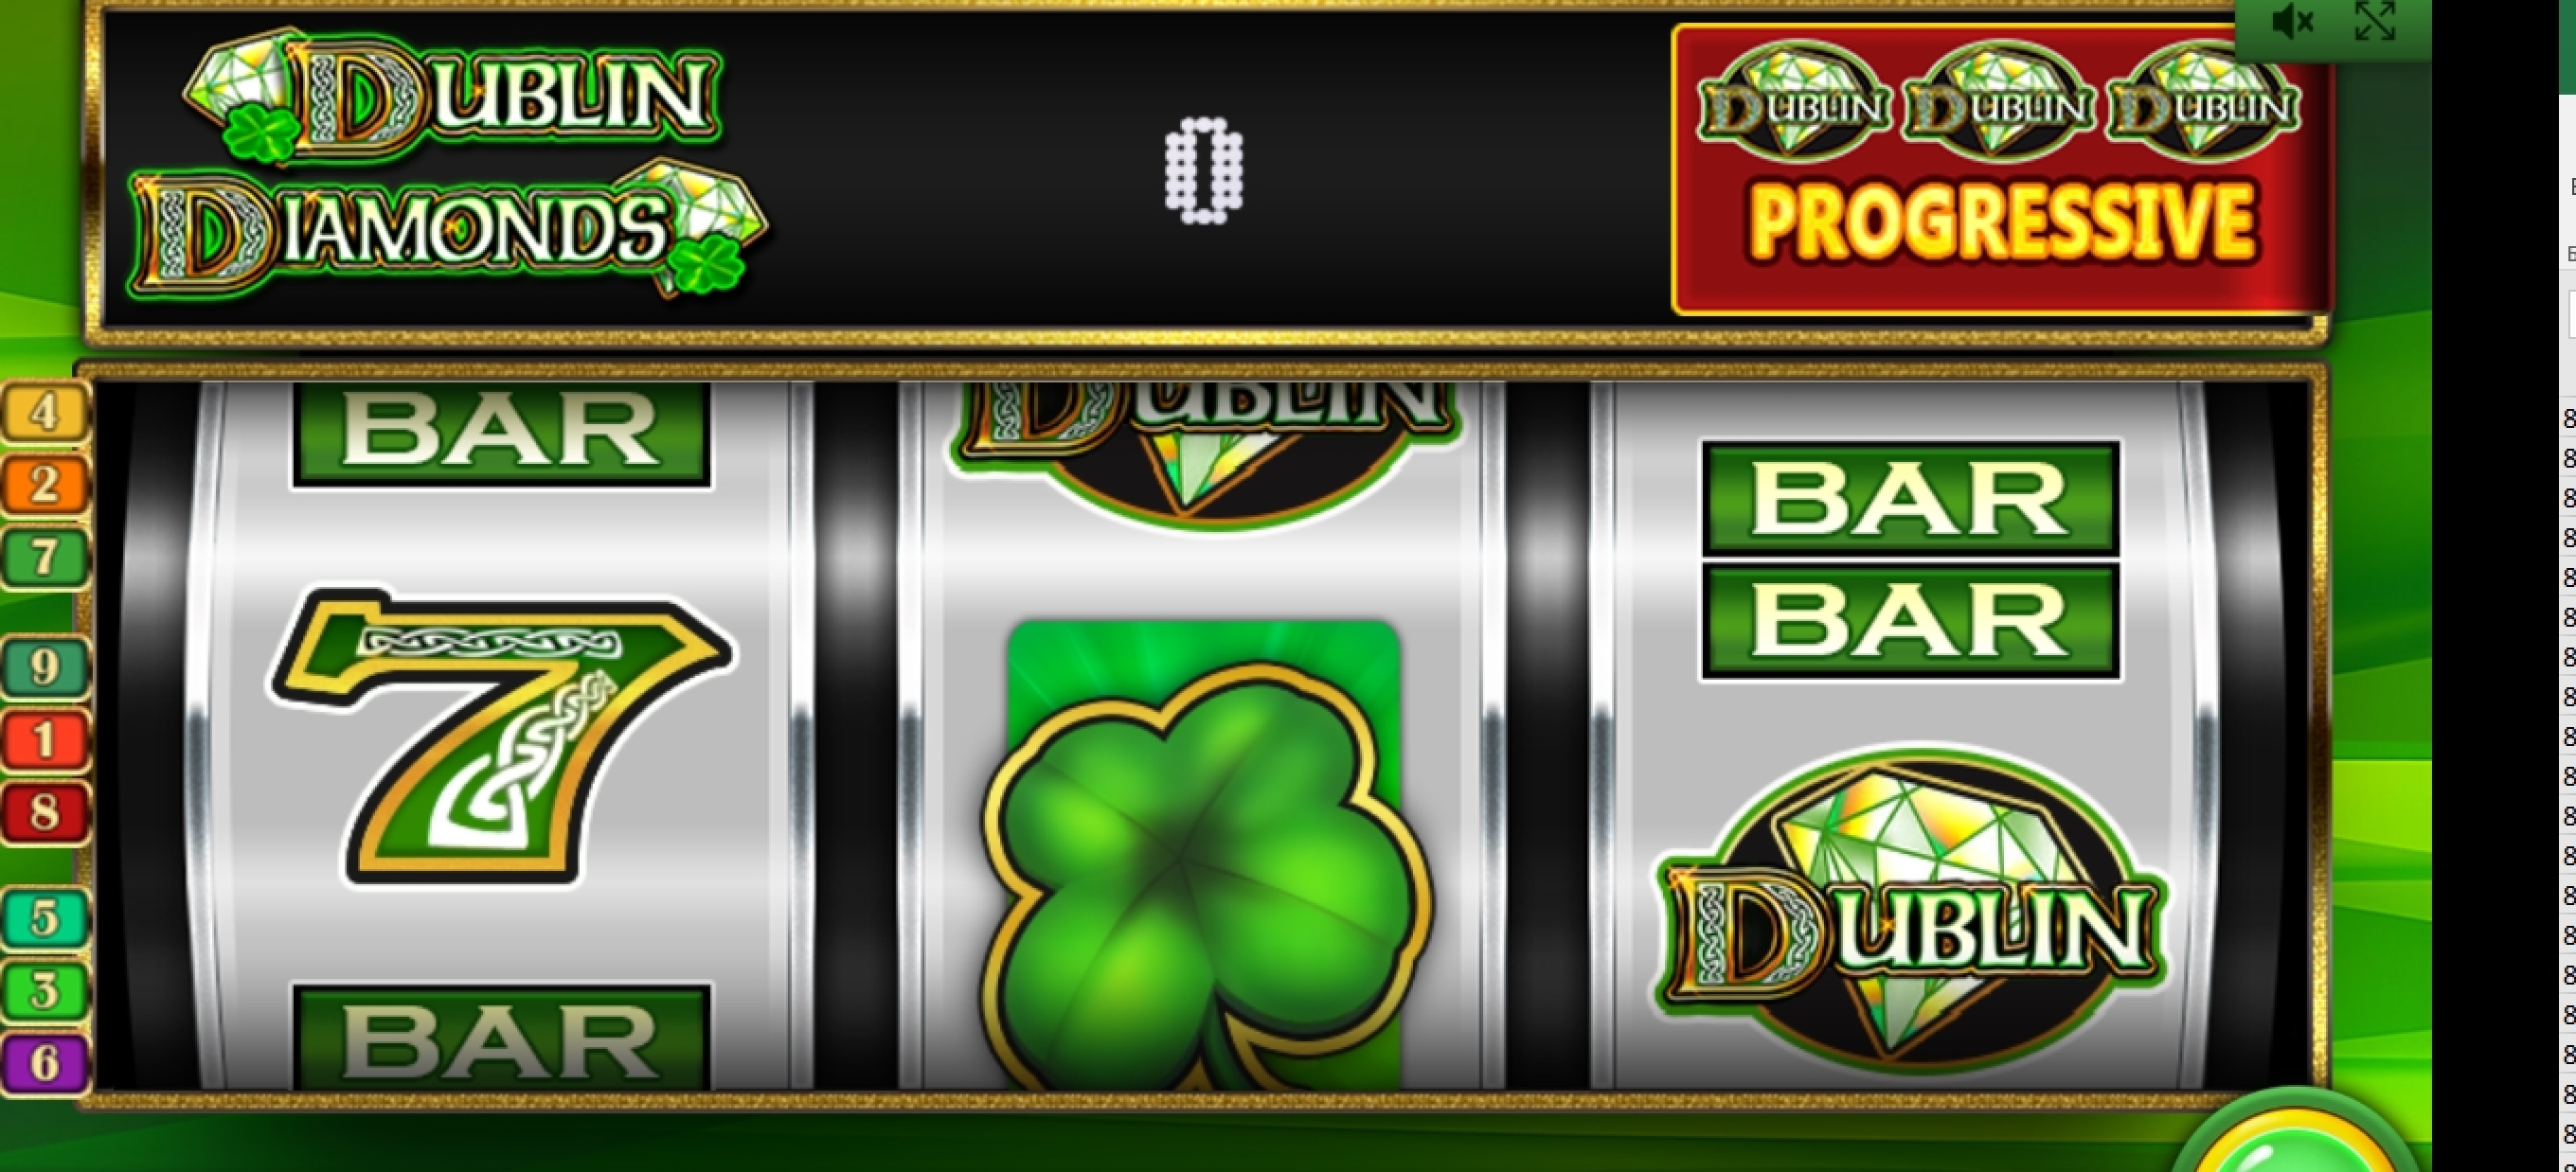 Reels in Dublin Diamonds Slot Game by IGT